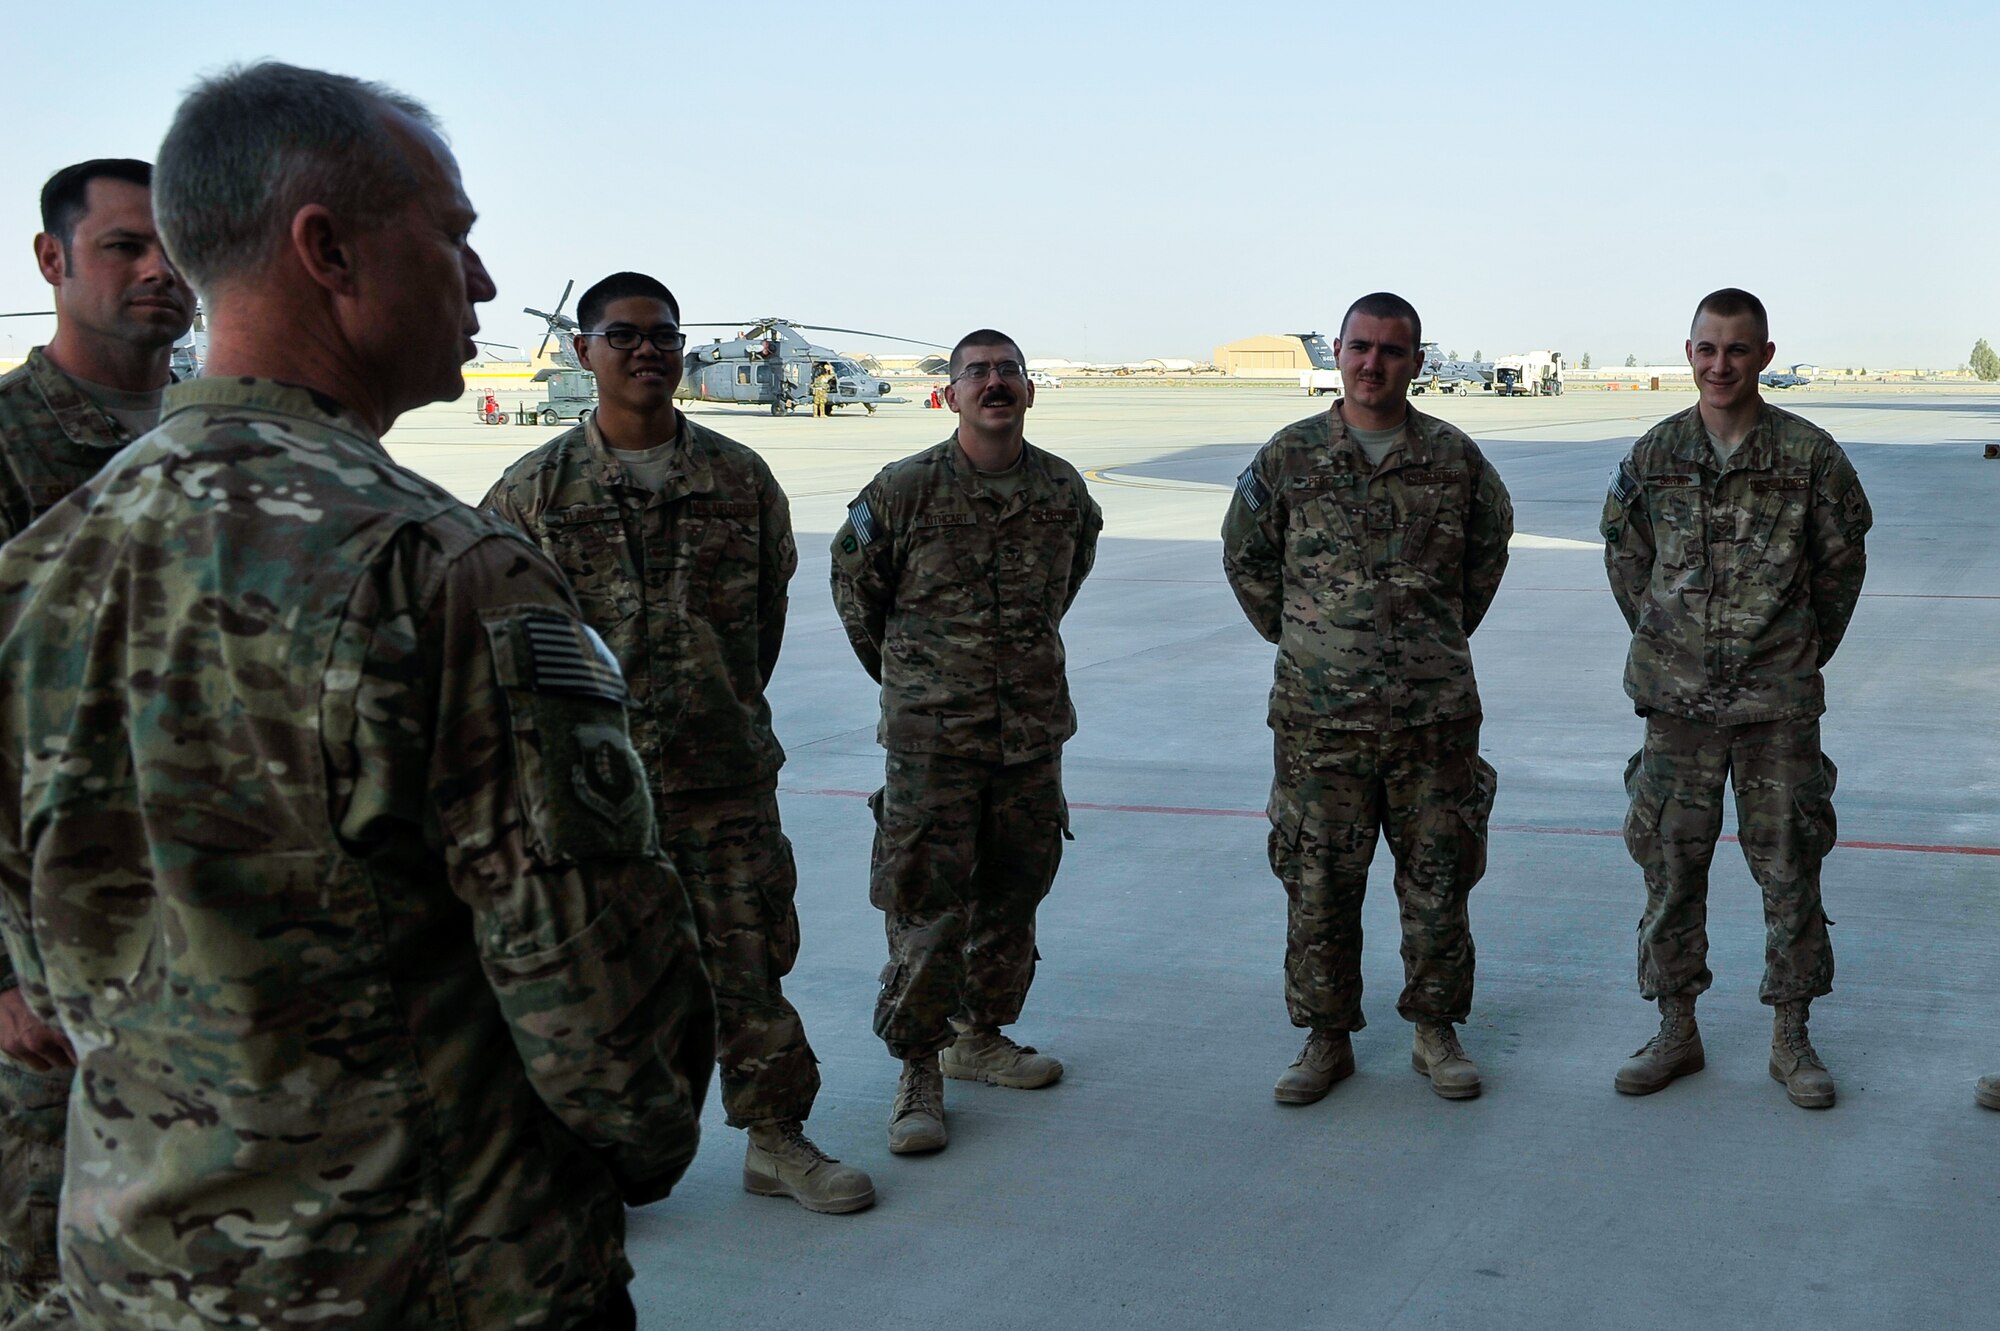 U.S. Air Force Brig. Gen. Mark D. Kelly, 455th Air Expeditionary Wing commander, talks with Airmen assigned to the 451st Air Expeditionary Group during a visit to Kandahar Airfield, Afghanistan, May 2, 2015.  The general along with Chief Master Sgt. Jeffery Brown, 455th AEW command chief, met with Airmen from across the group who provide intelligence, surveillance and reconnaissance, command and control, personnel recovery, and airborne datalink capabilities to commanders in the Afghanistan theater of operations. (U.S. Air Force photo by Maj. Tony Wickman/Released)